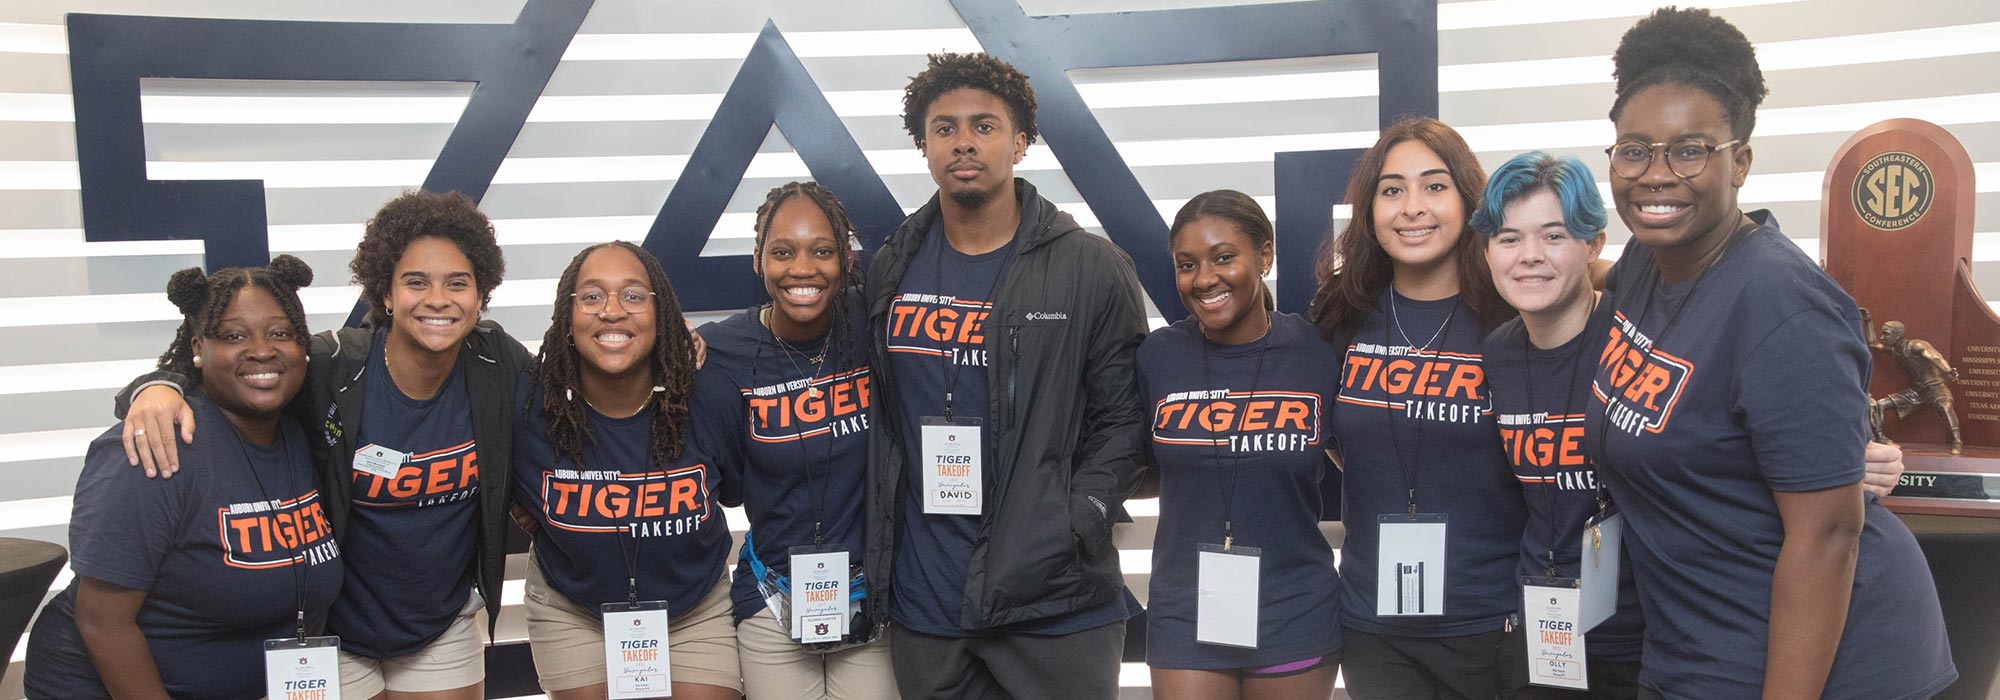 Several students with Tiger Takeoff shirts on pose for a photograph